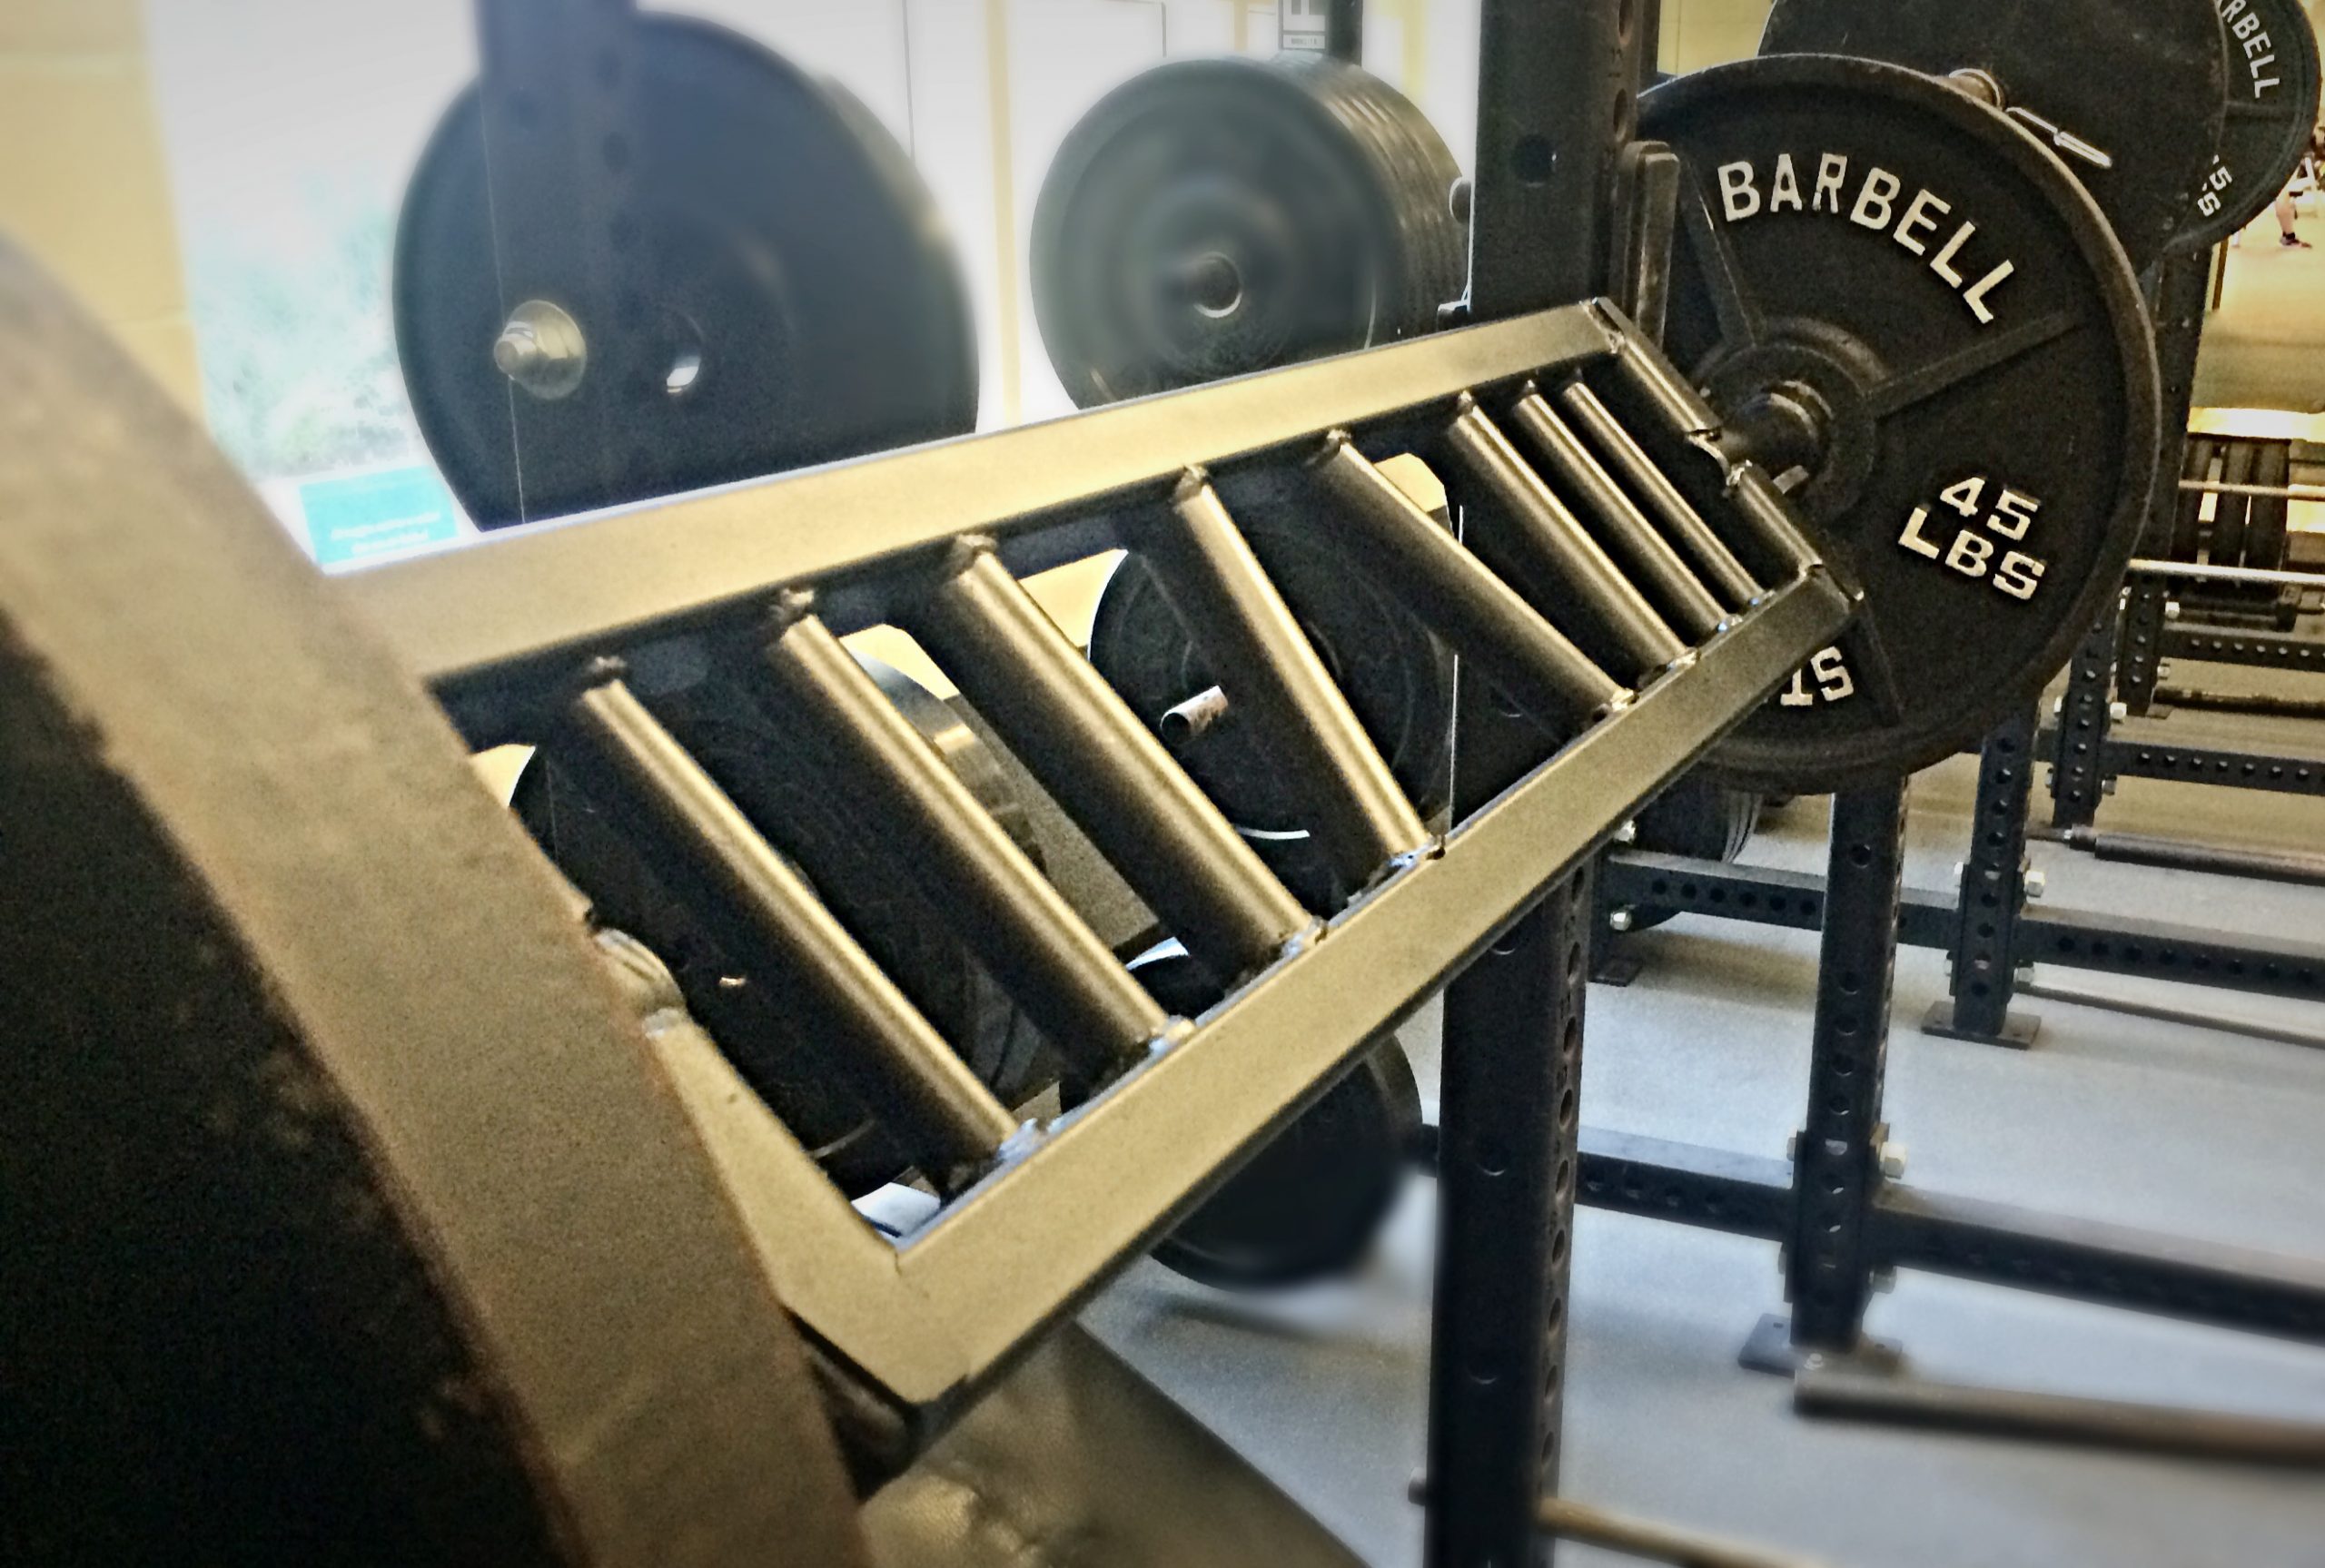 March 2018 Week 4 - Day 4: Pause Swiss Bar Floor Presses up to 255x9